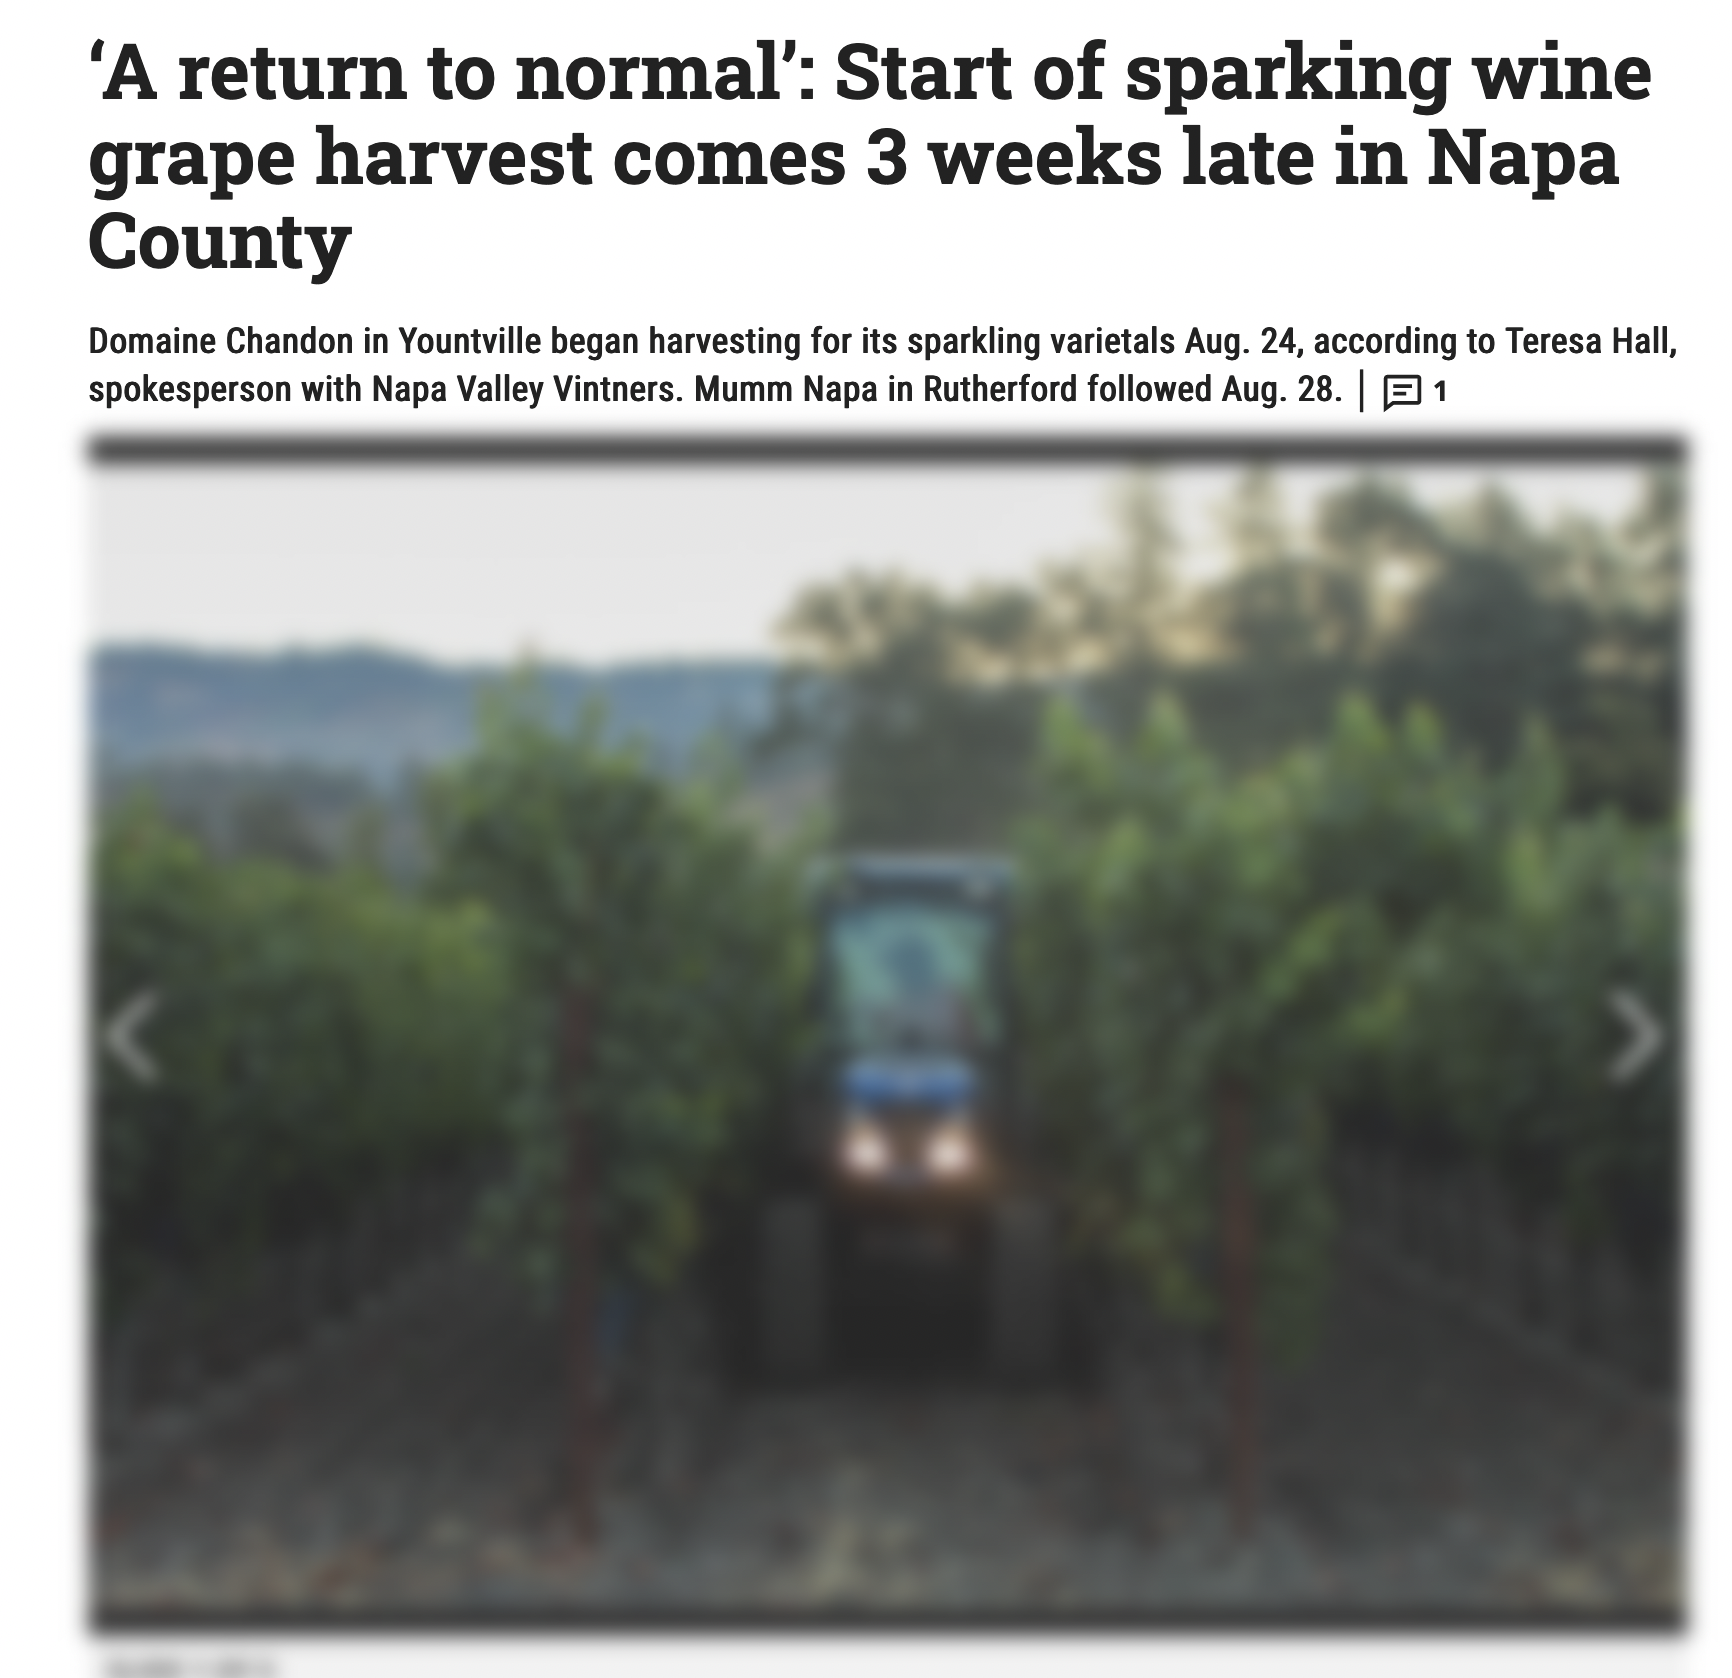 ‘A return to normal’: Start of sparkling wine grape harvest comes 3 weeks late in Napa County